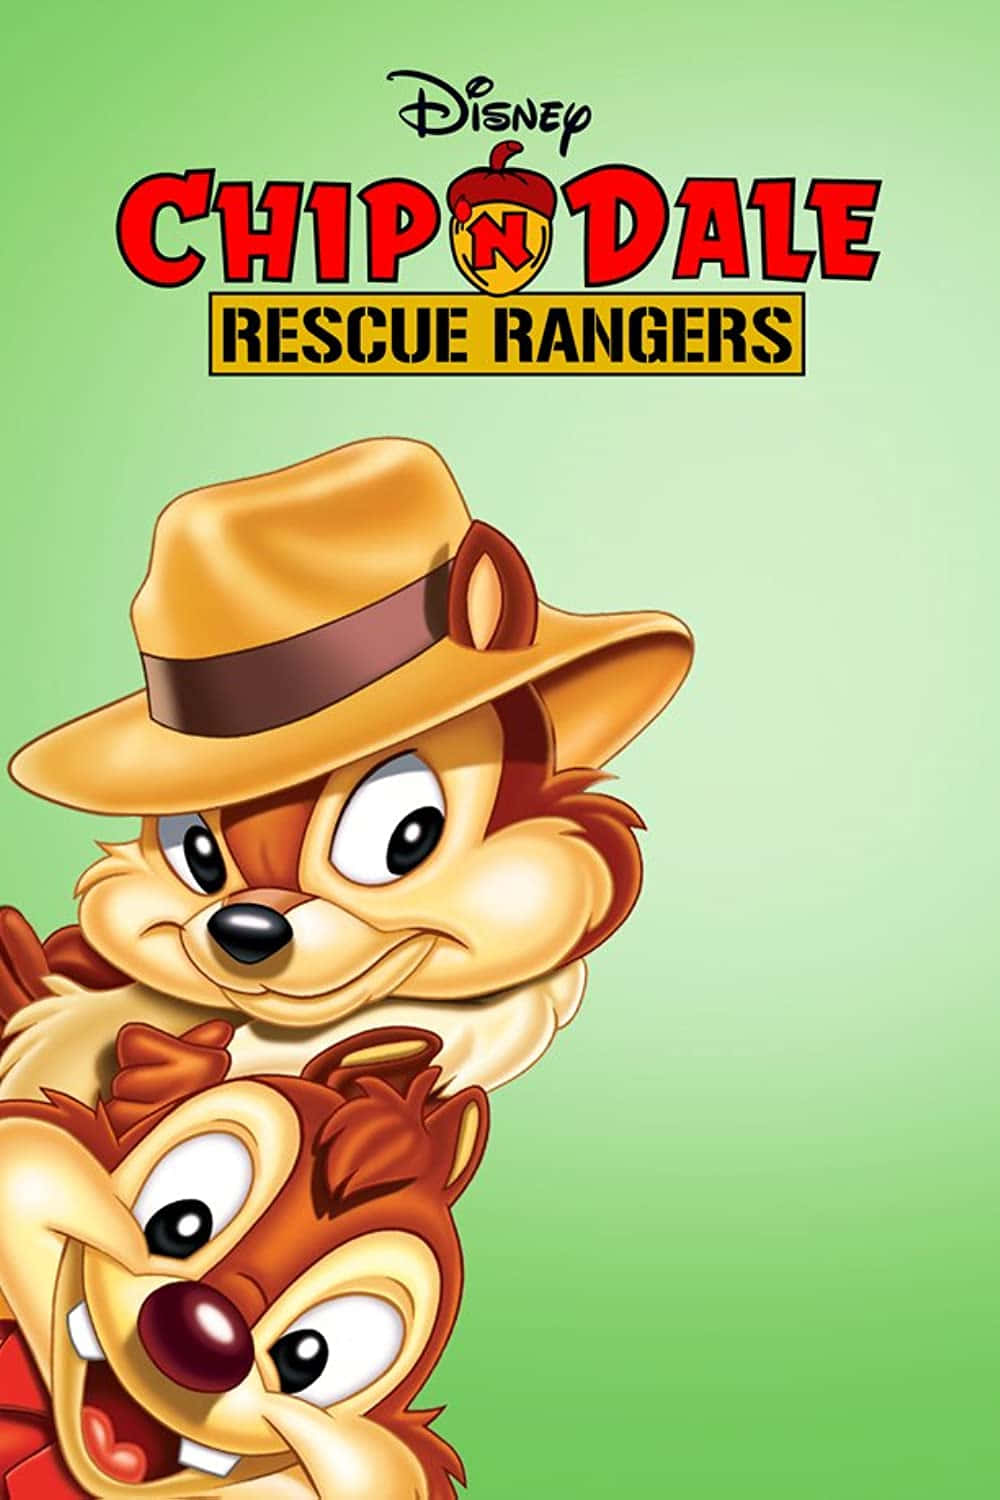 Join Chip 'n' Dale on their next adventure!